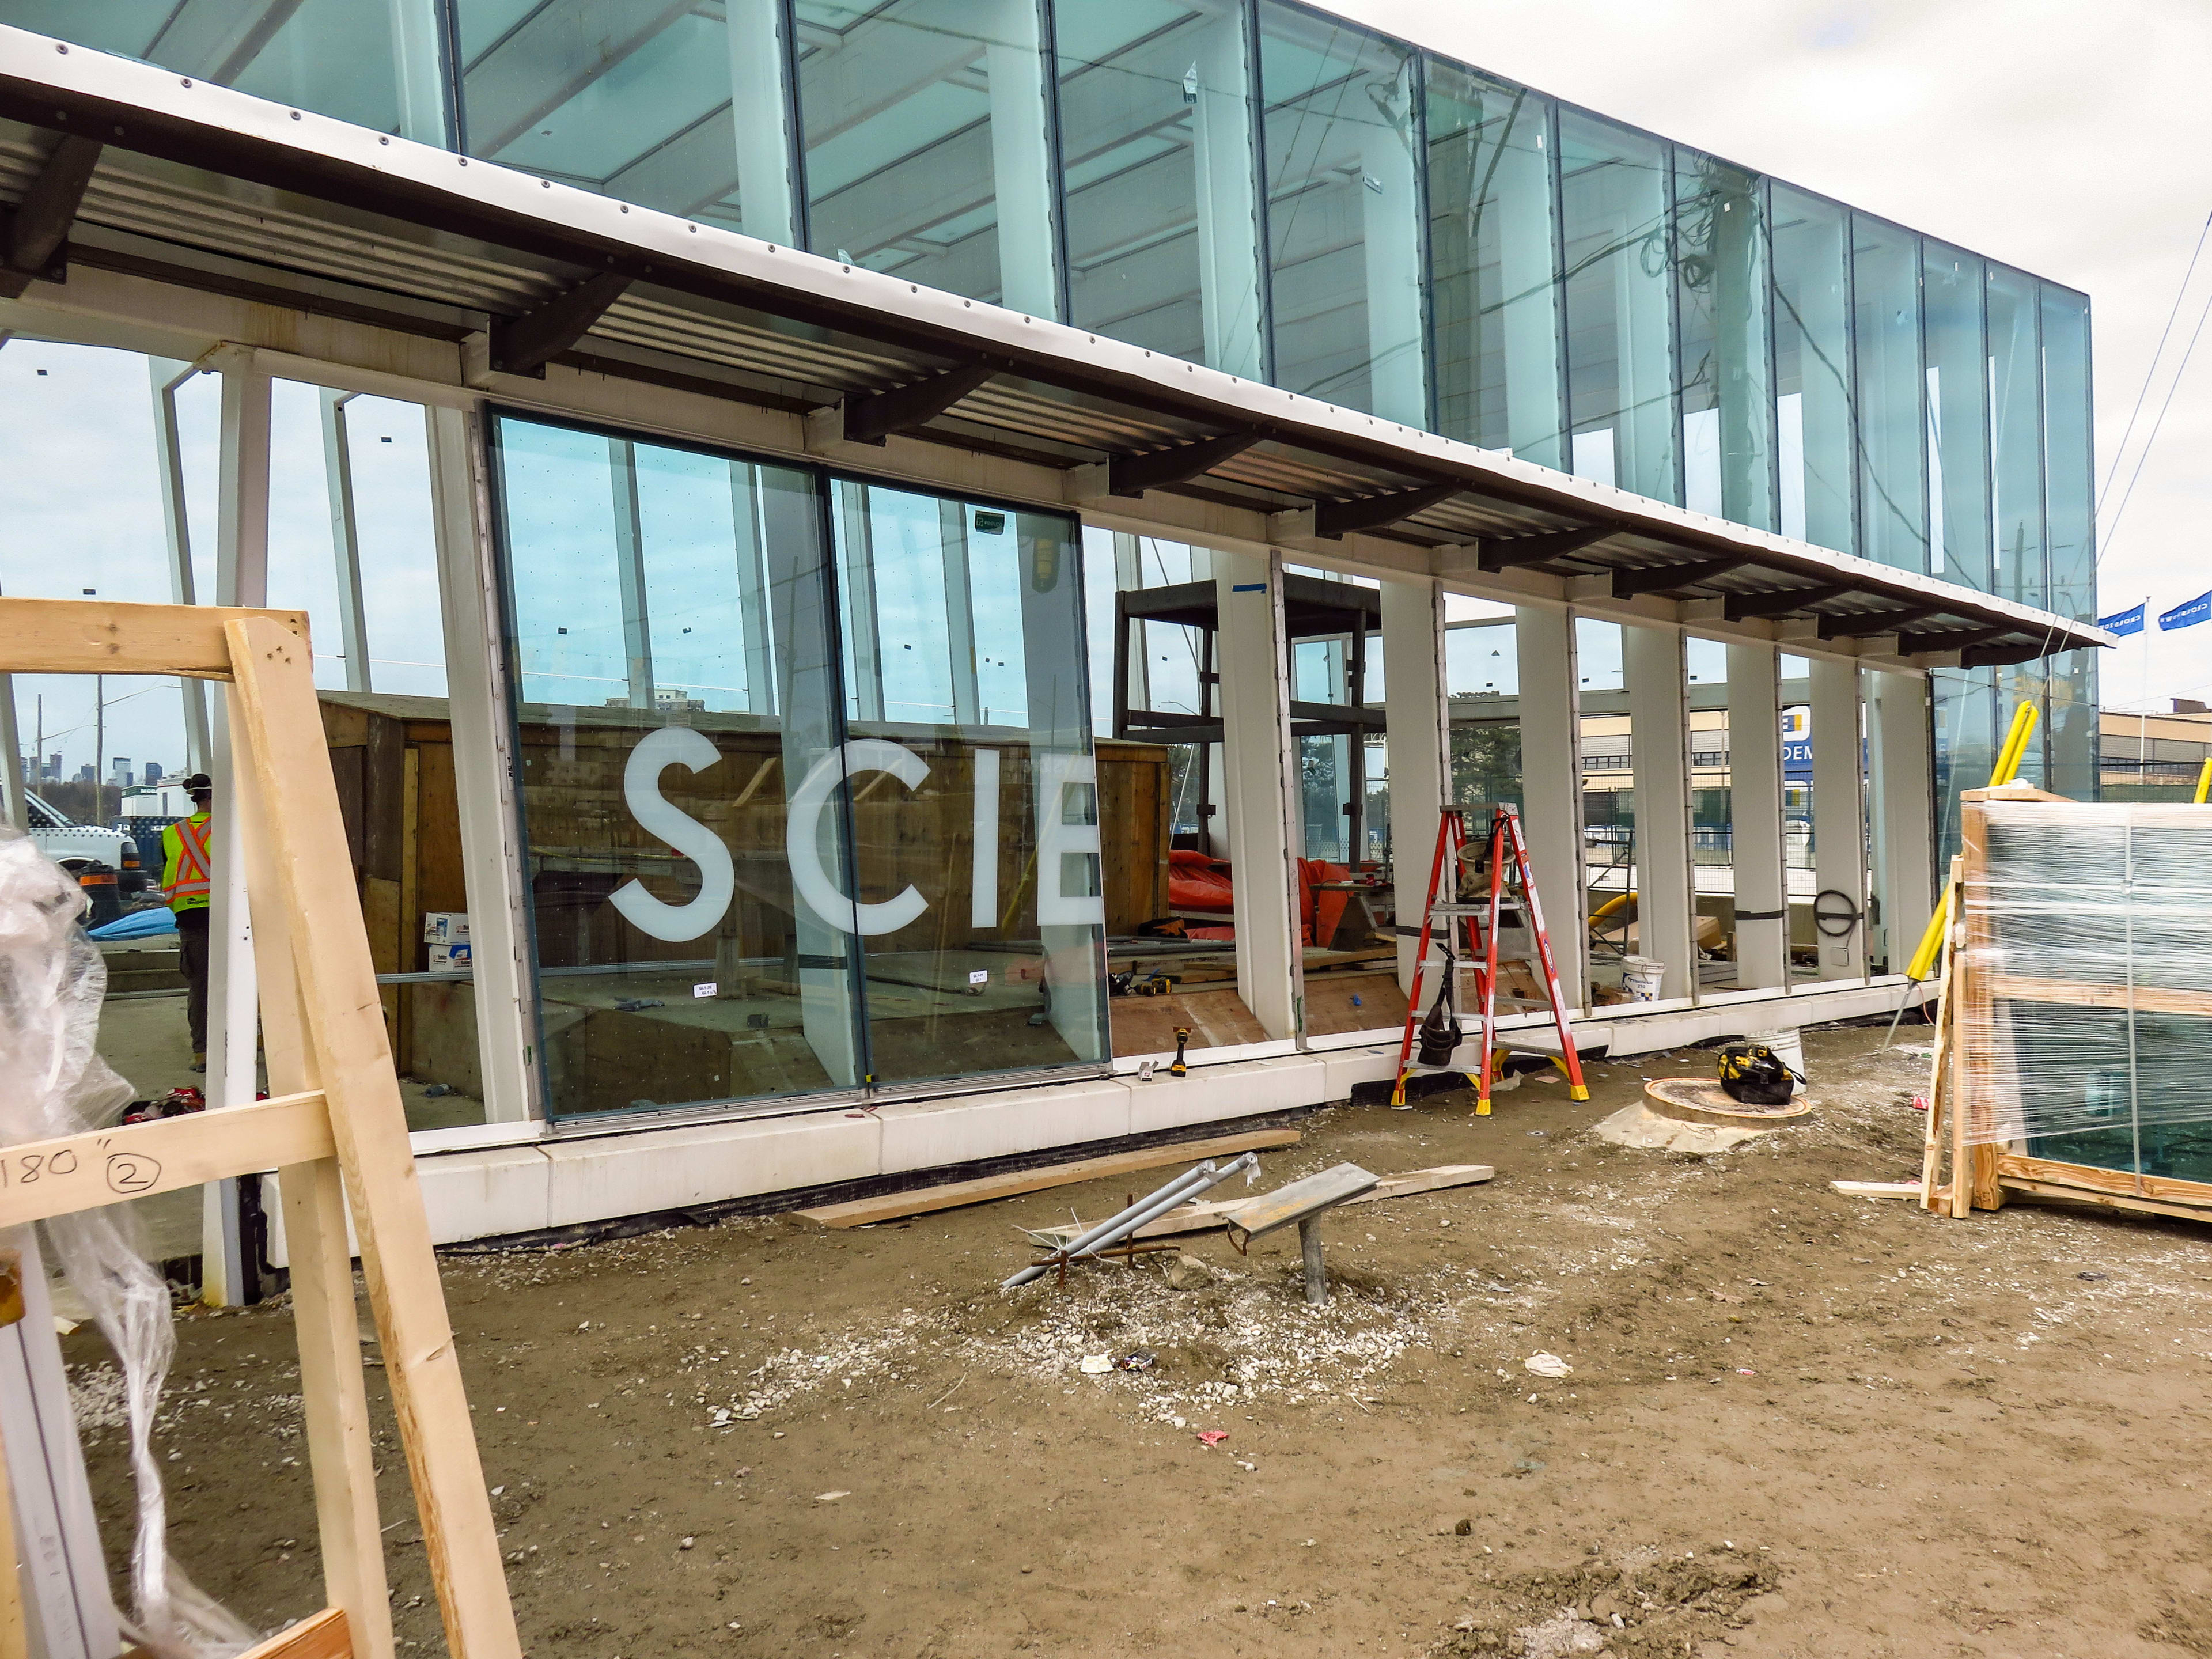 Science Centre' is being spelled out on main entrance windows.